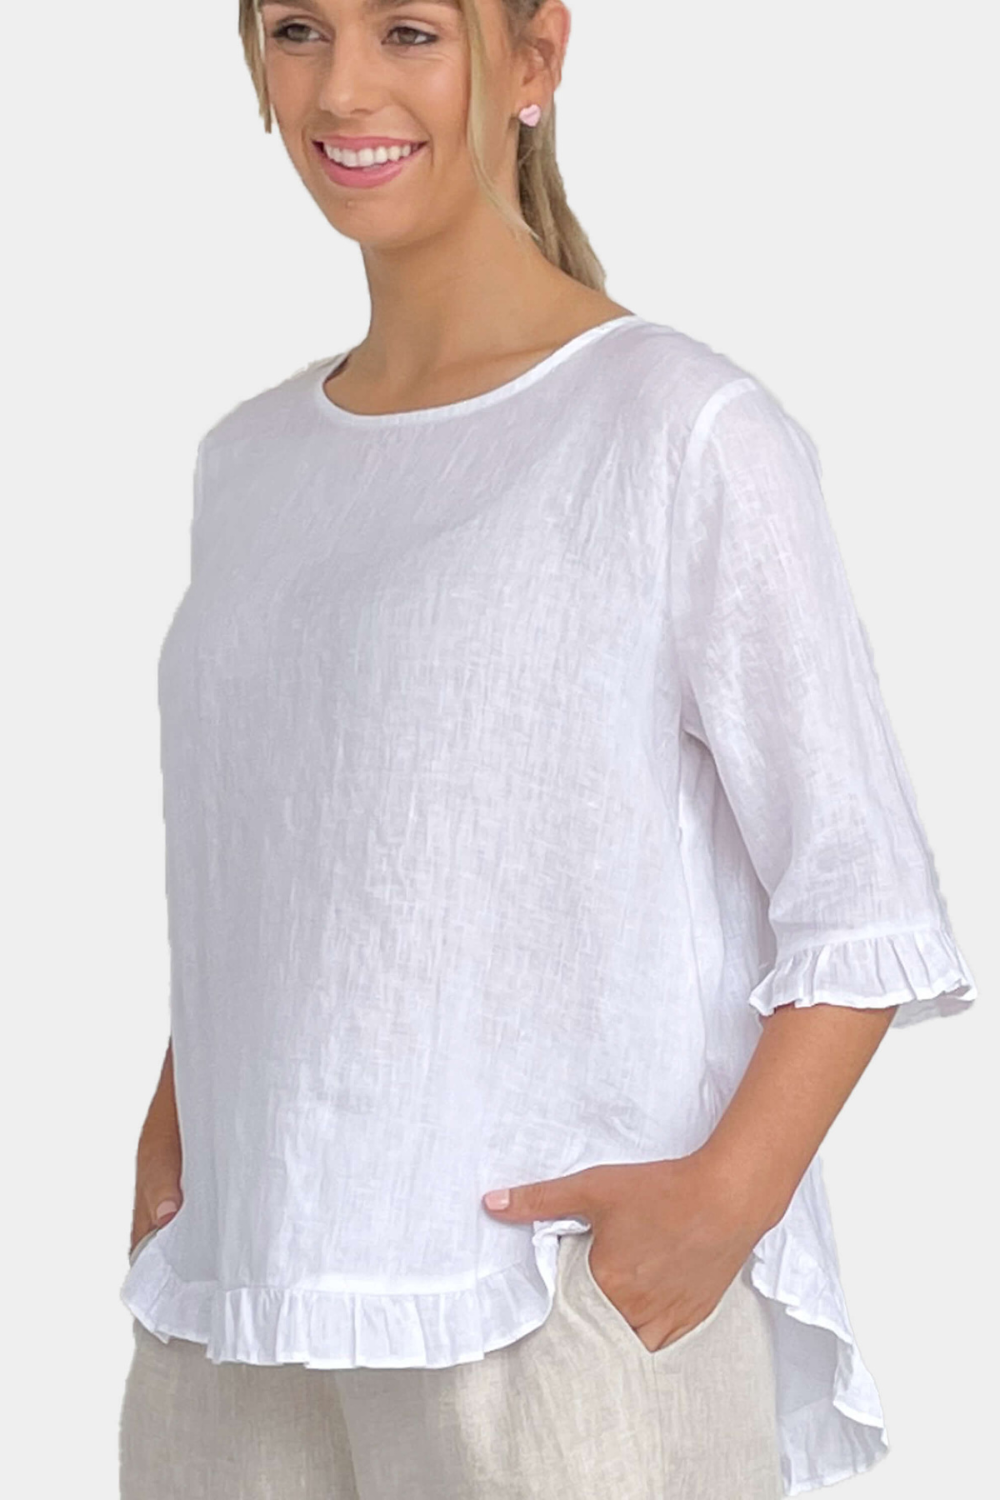 AMYIC 100% Linen Middle Sleeve Frill Shirt - White